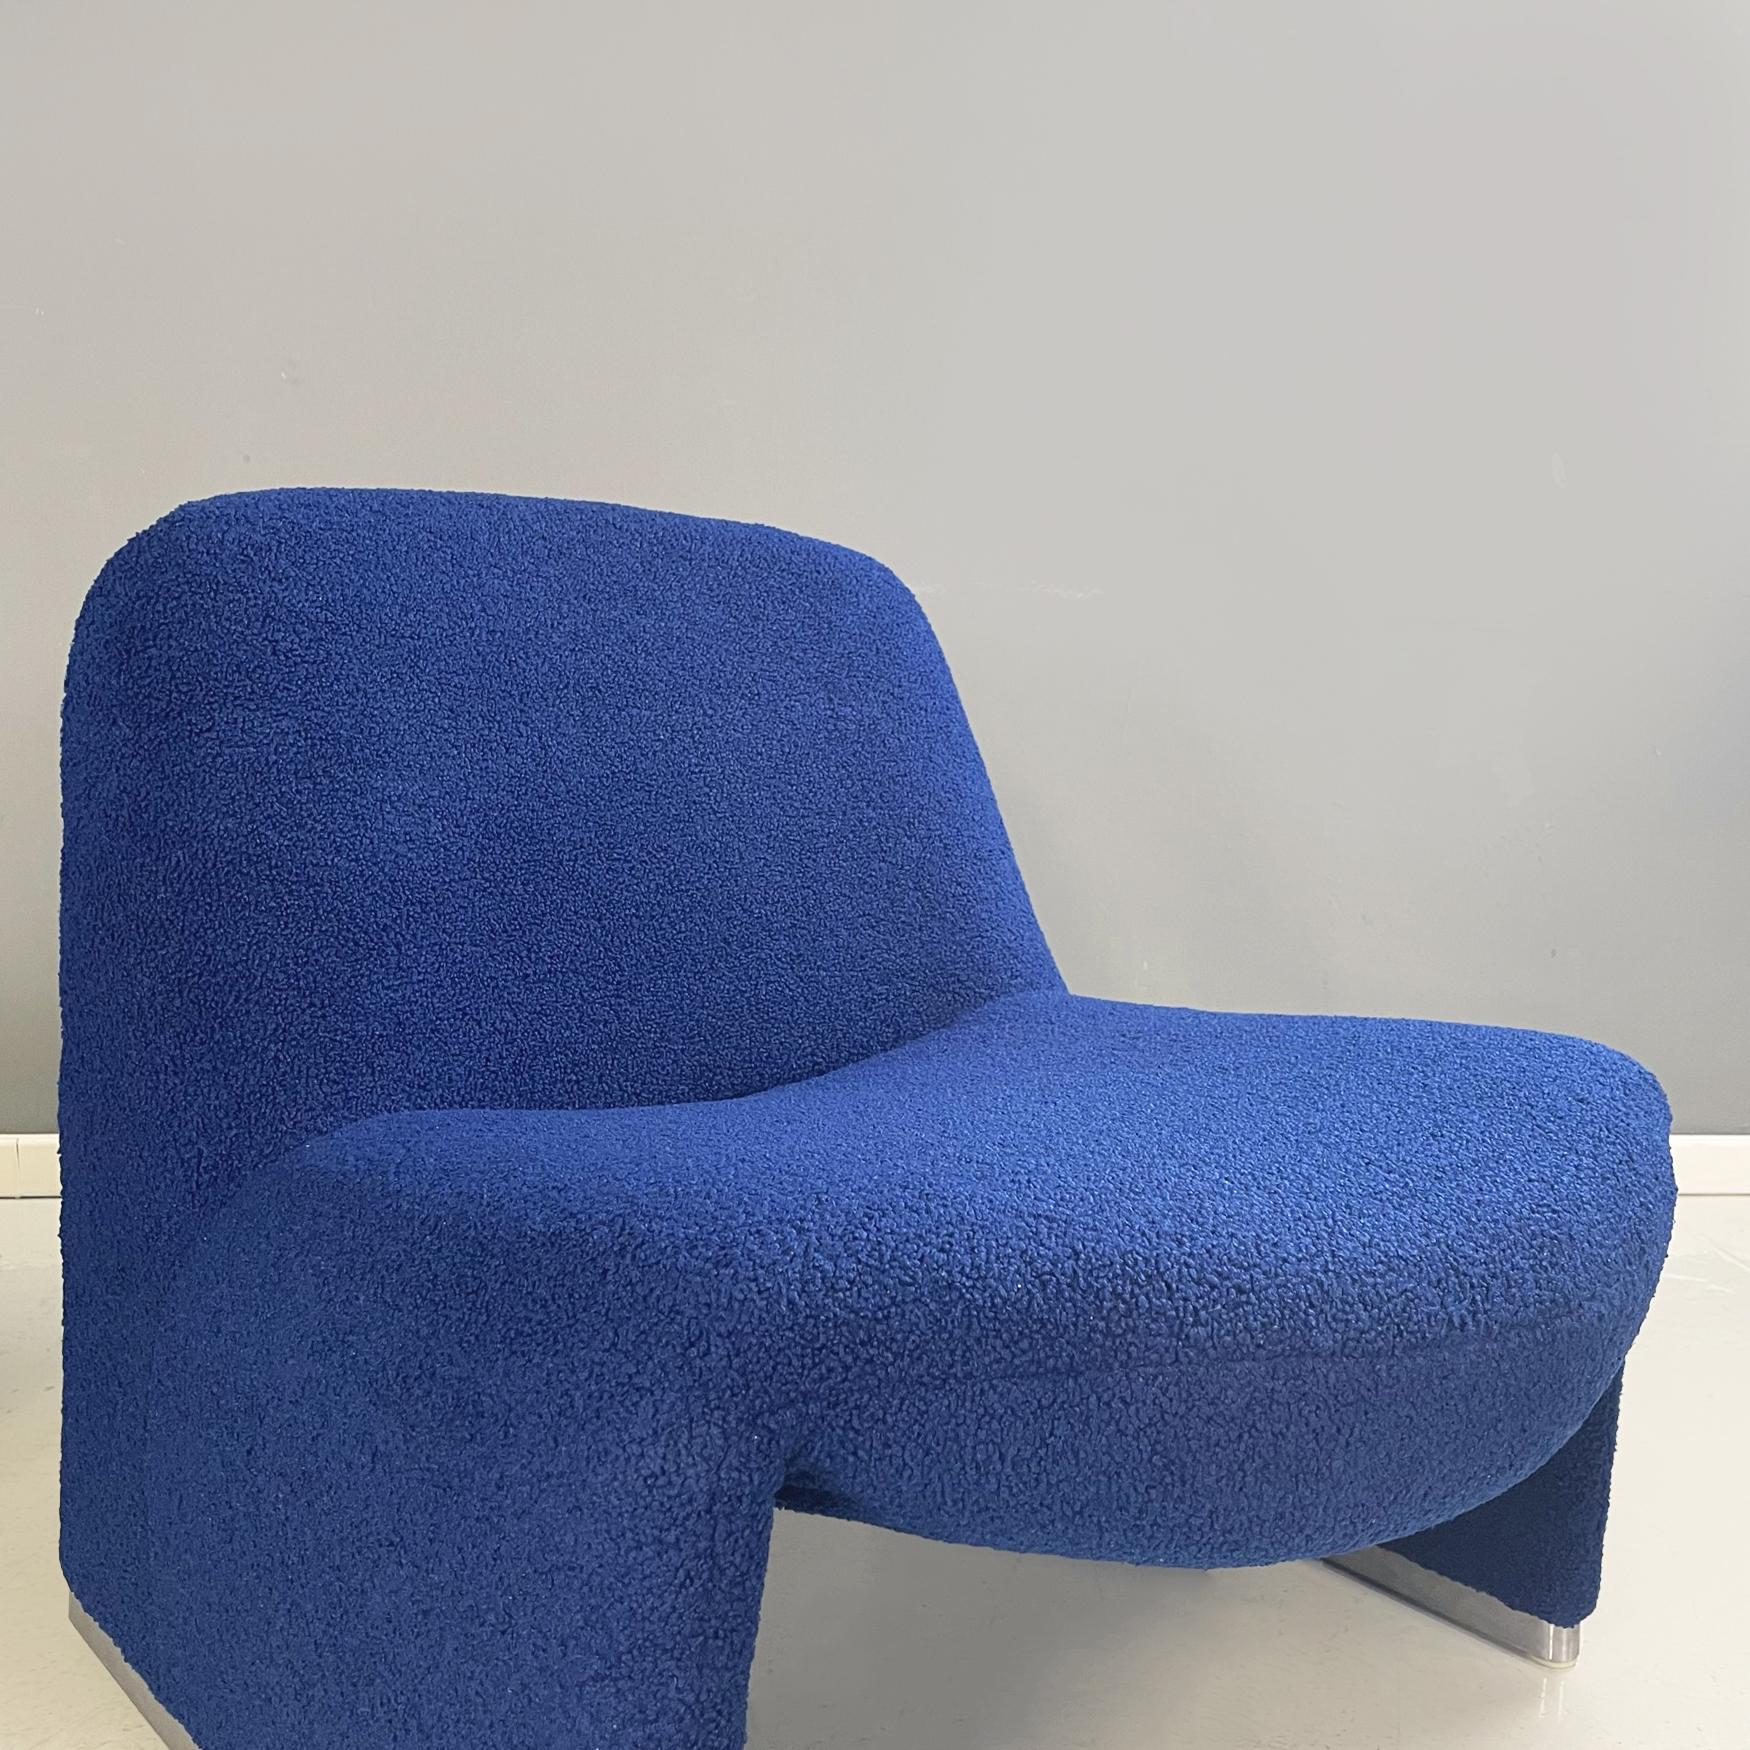 Aluminum Italian modern Blue fabric Armchairs Alky by Piretti for Anonima Castelli, 1970s For Sale